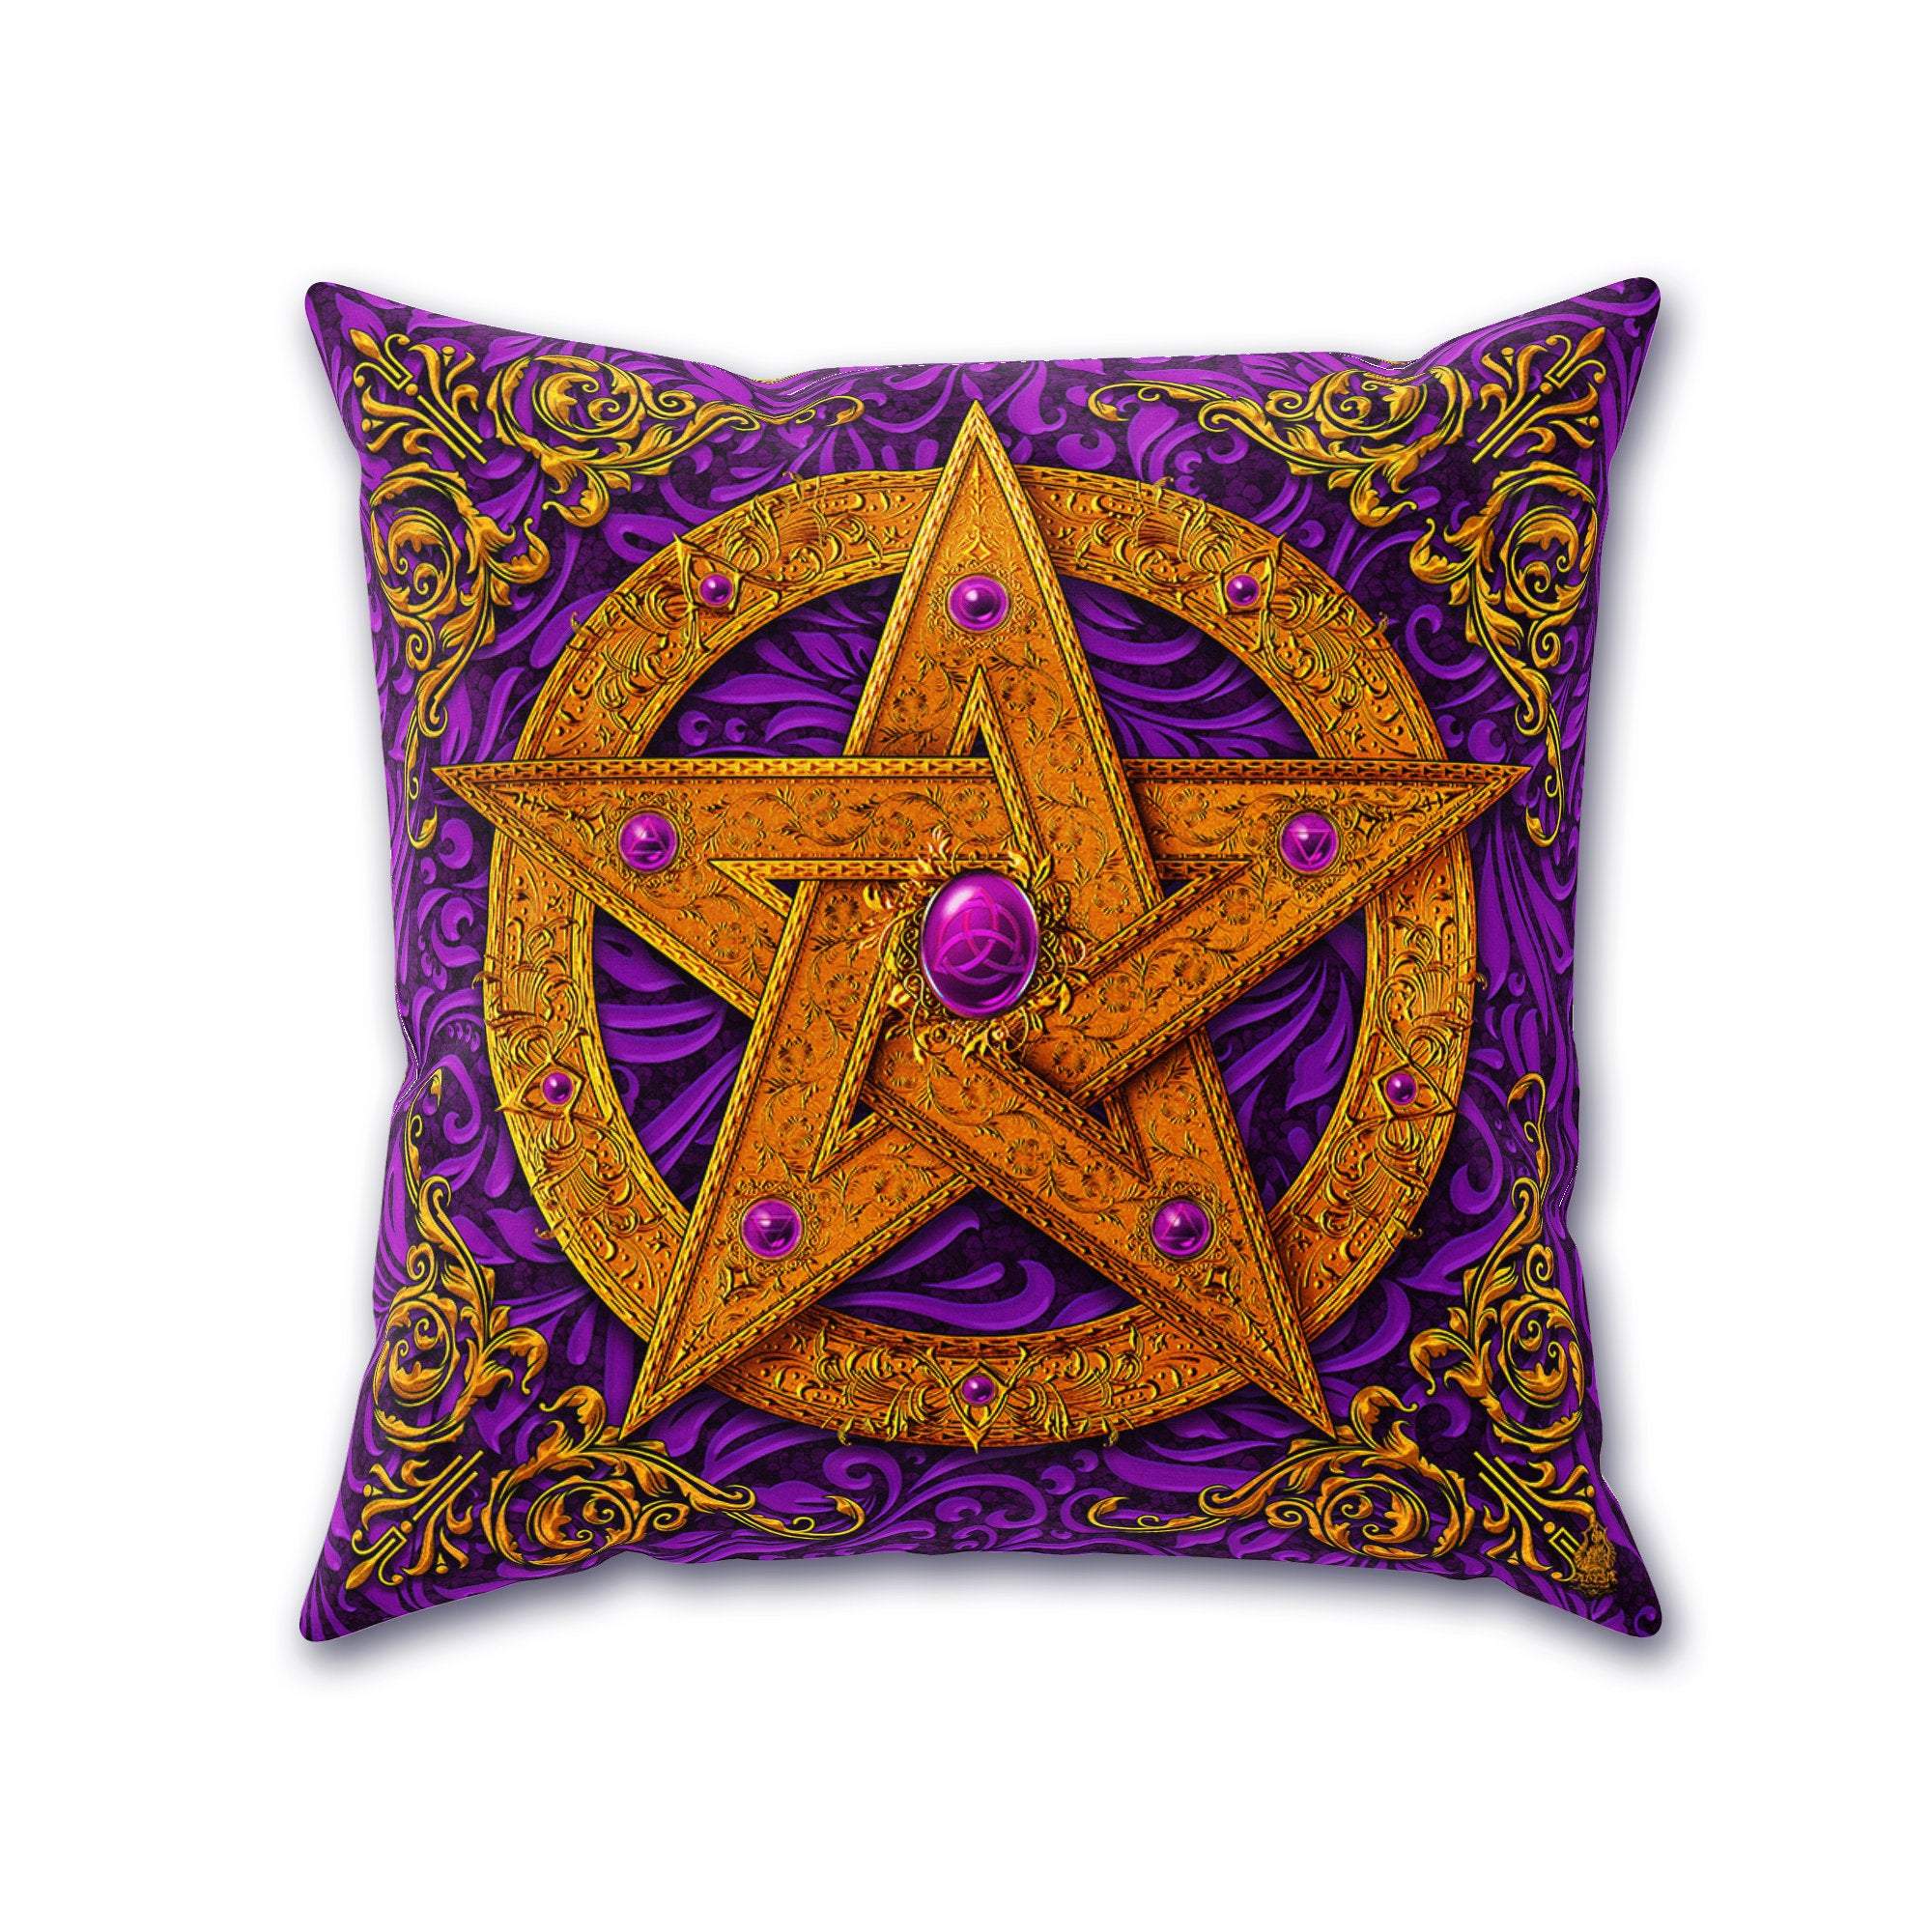 Pentacle Throw Pillow, Decorative Accent Cushion, Wicca, Witchy Room Decor, Pagan Art, Funky and Eclectic Home - Purple - Abysm Internal